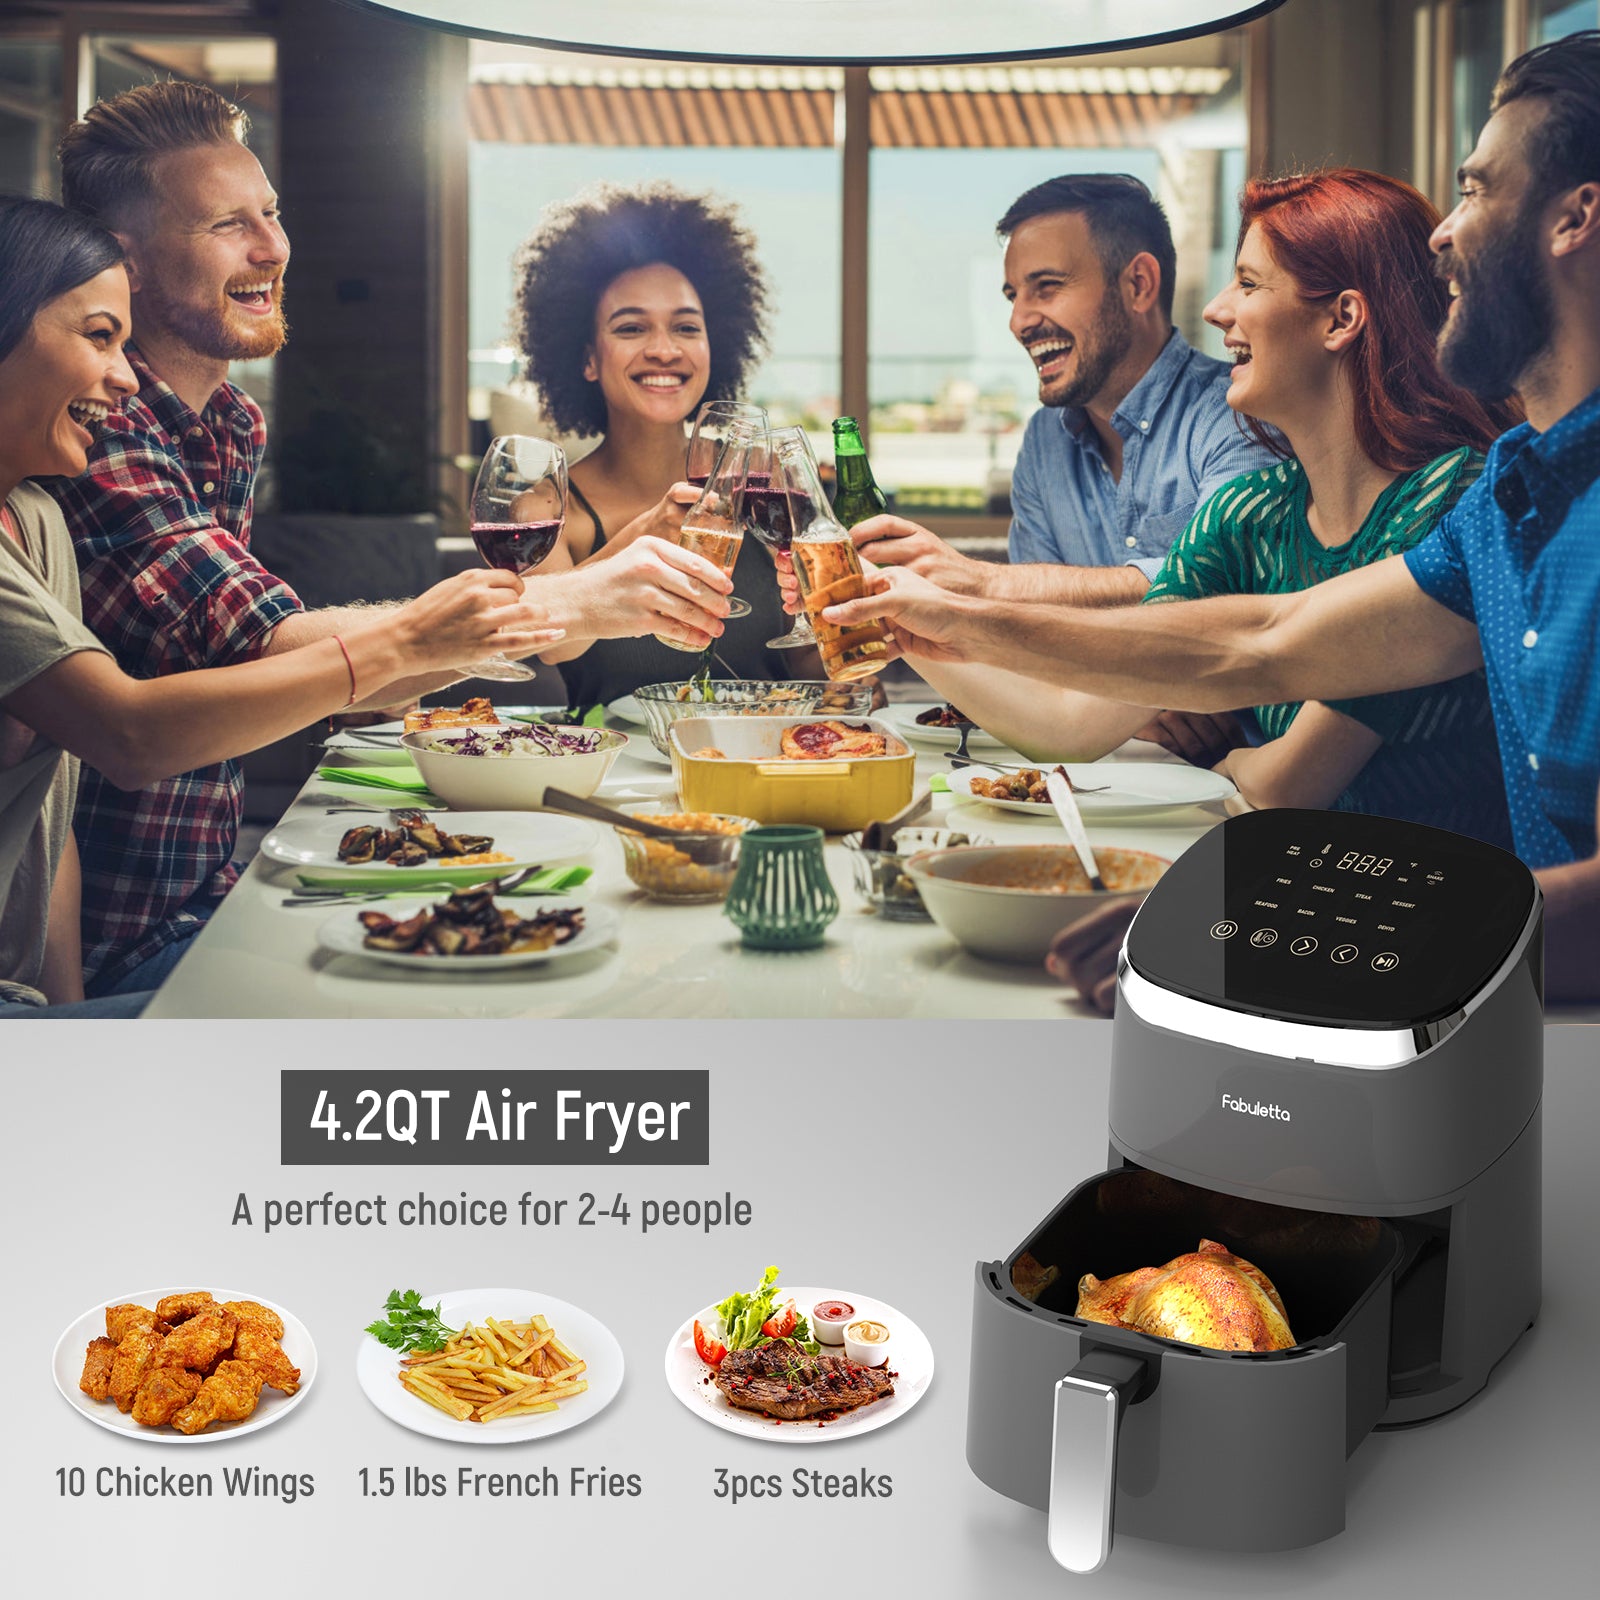 COSORI Smart Air Fryer 4 Qt with 7 Cooking France